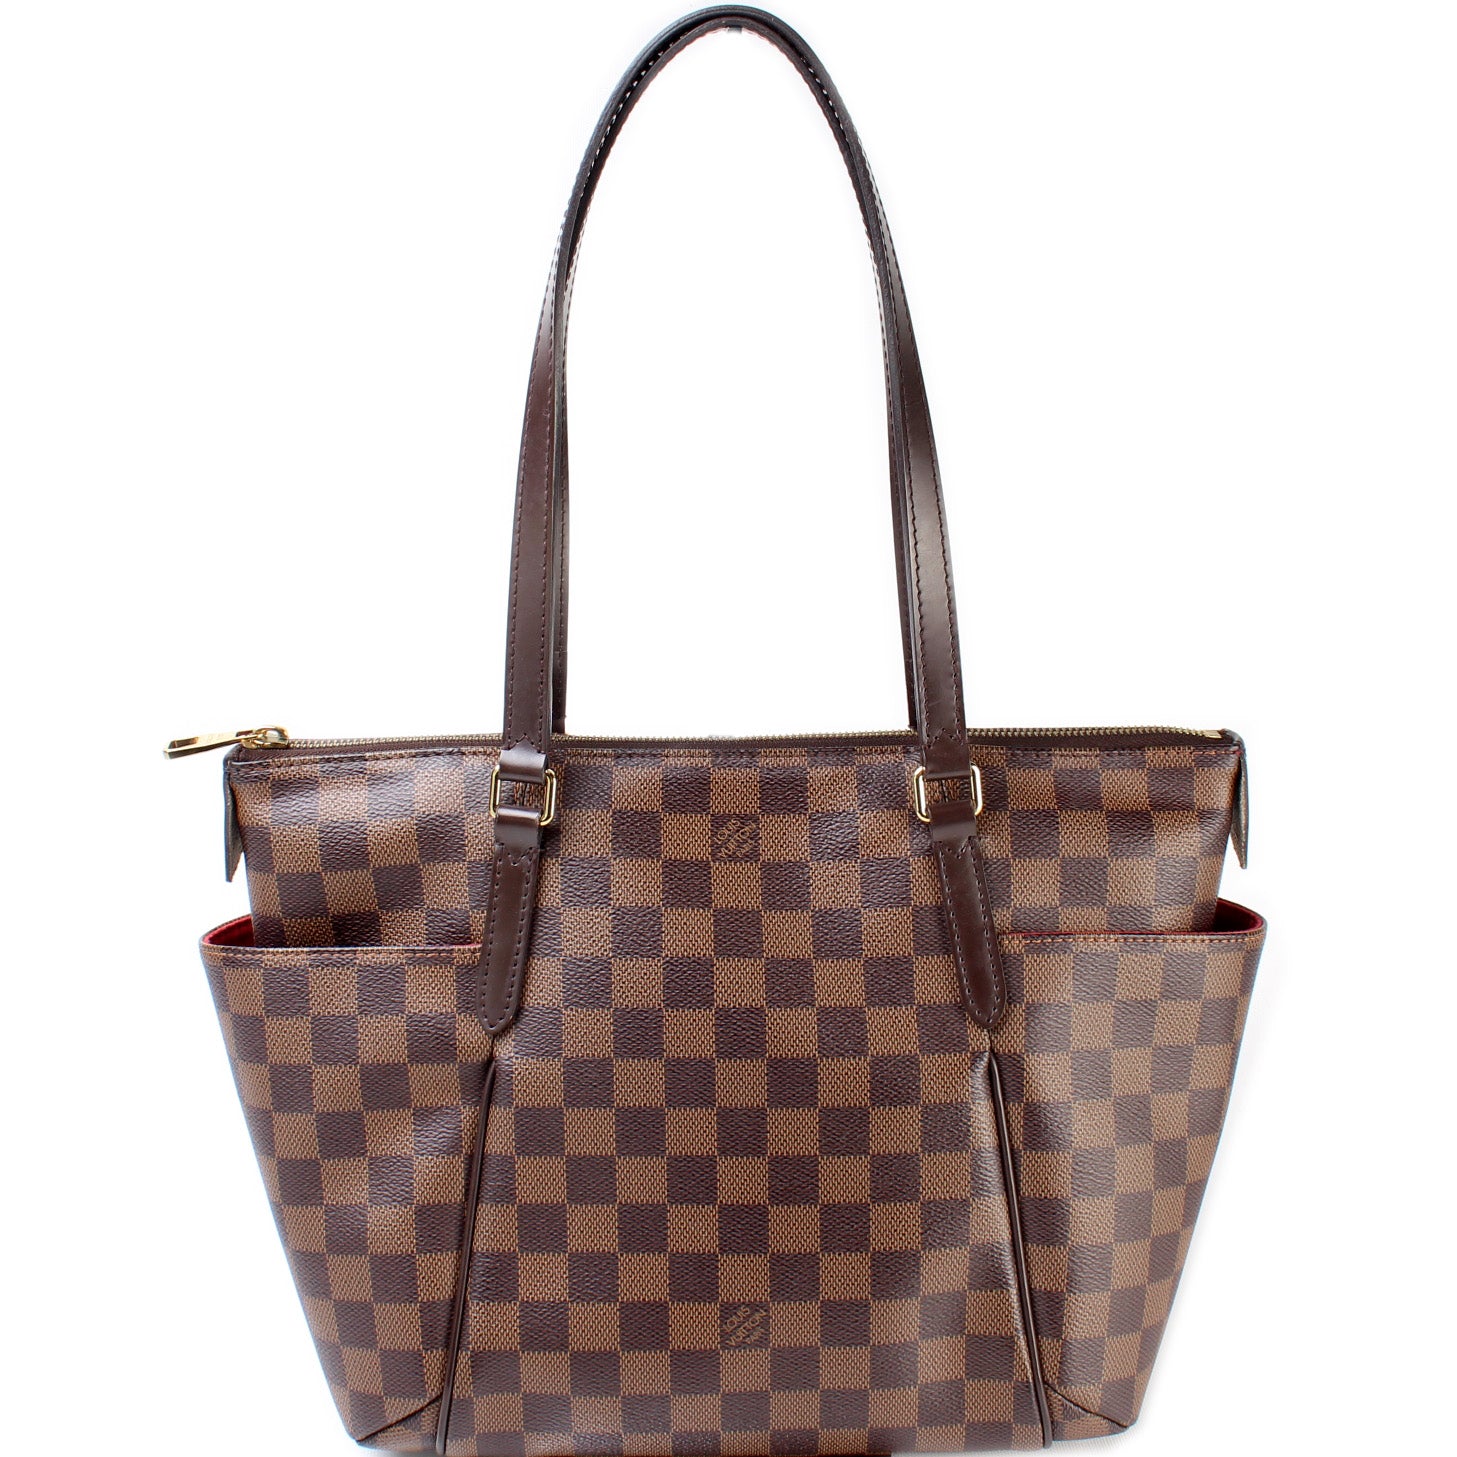 Louis Vuitton Totally PM in Damier Ebene Coated Canvas in Good